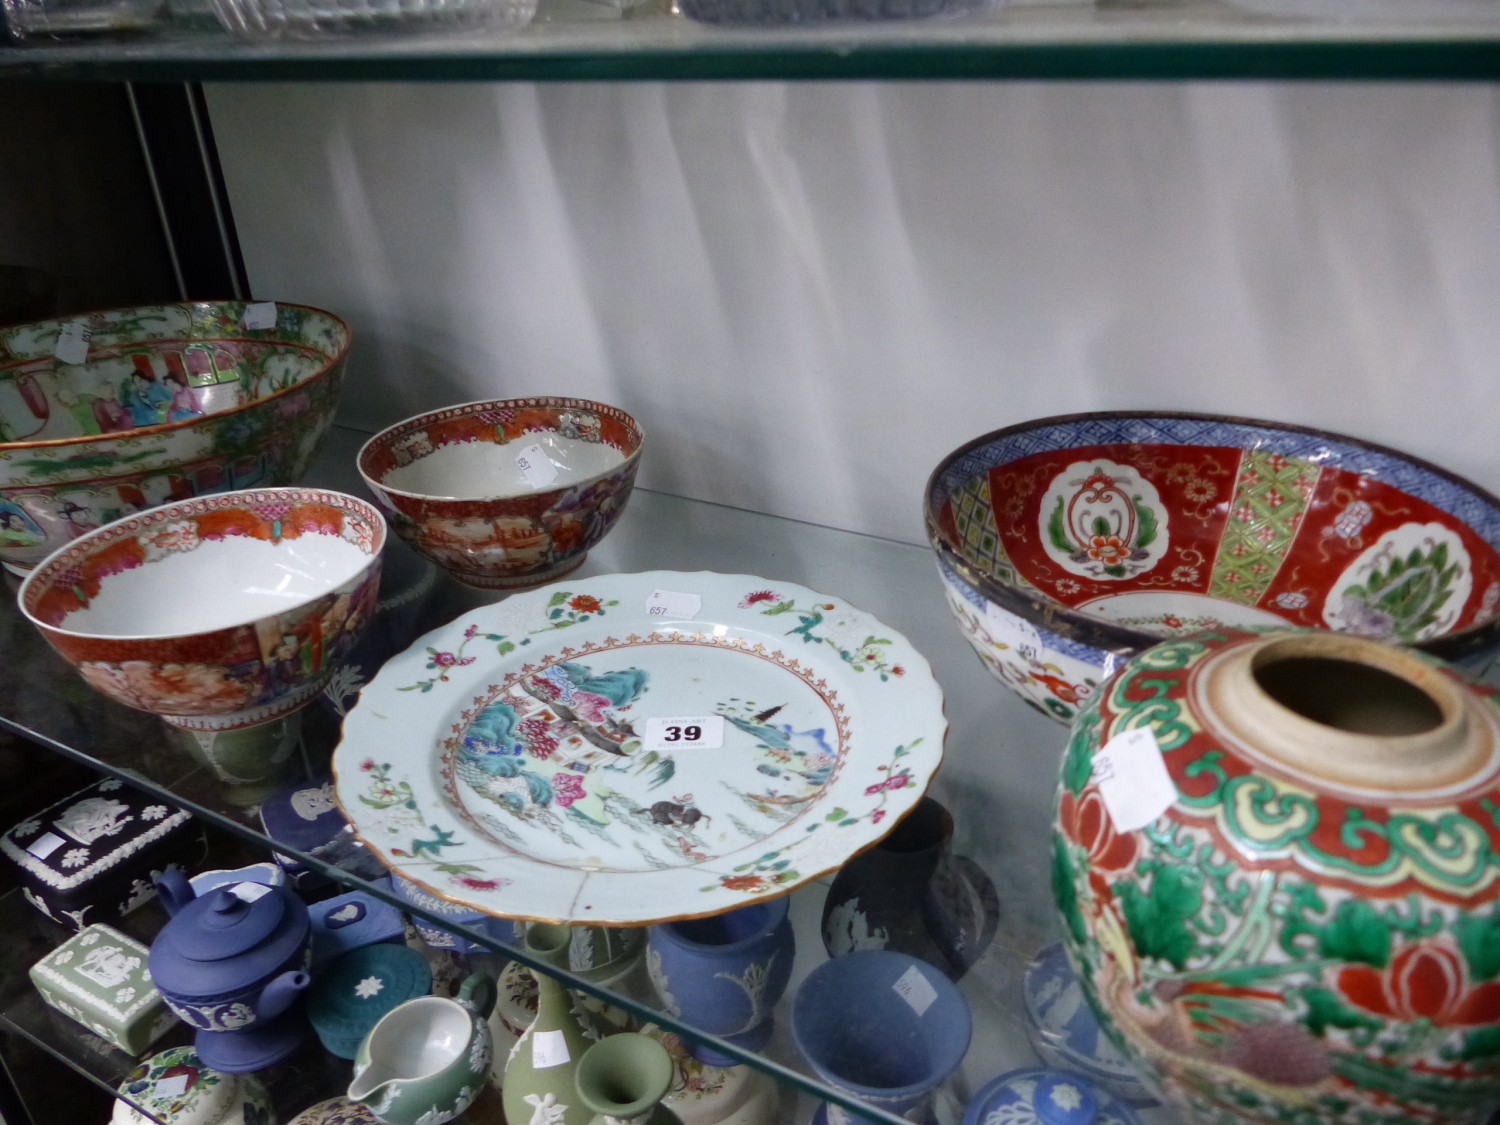 A CHINESE FAMILLE ROSE BOWL, A PAIR OF CHINESE SMALL BOWLS DECORATED WITH FIGURES AND OTHER